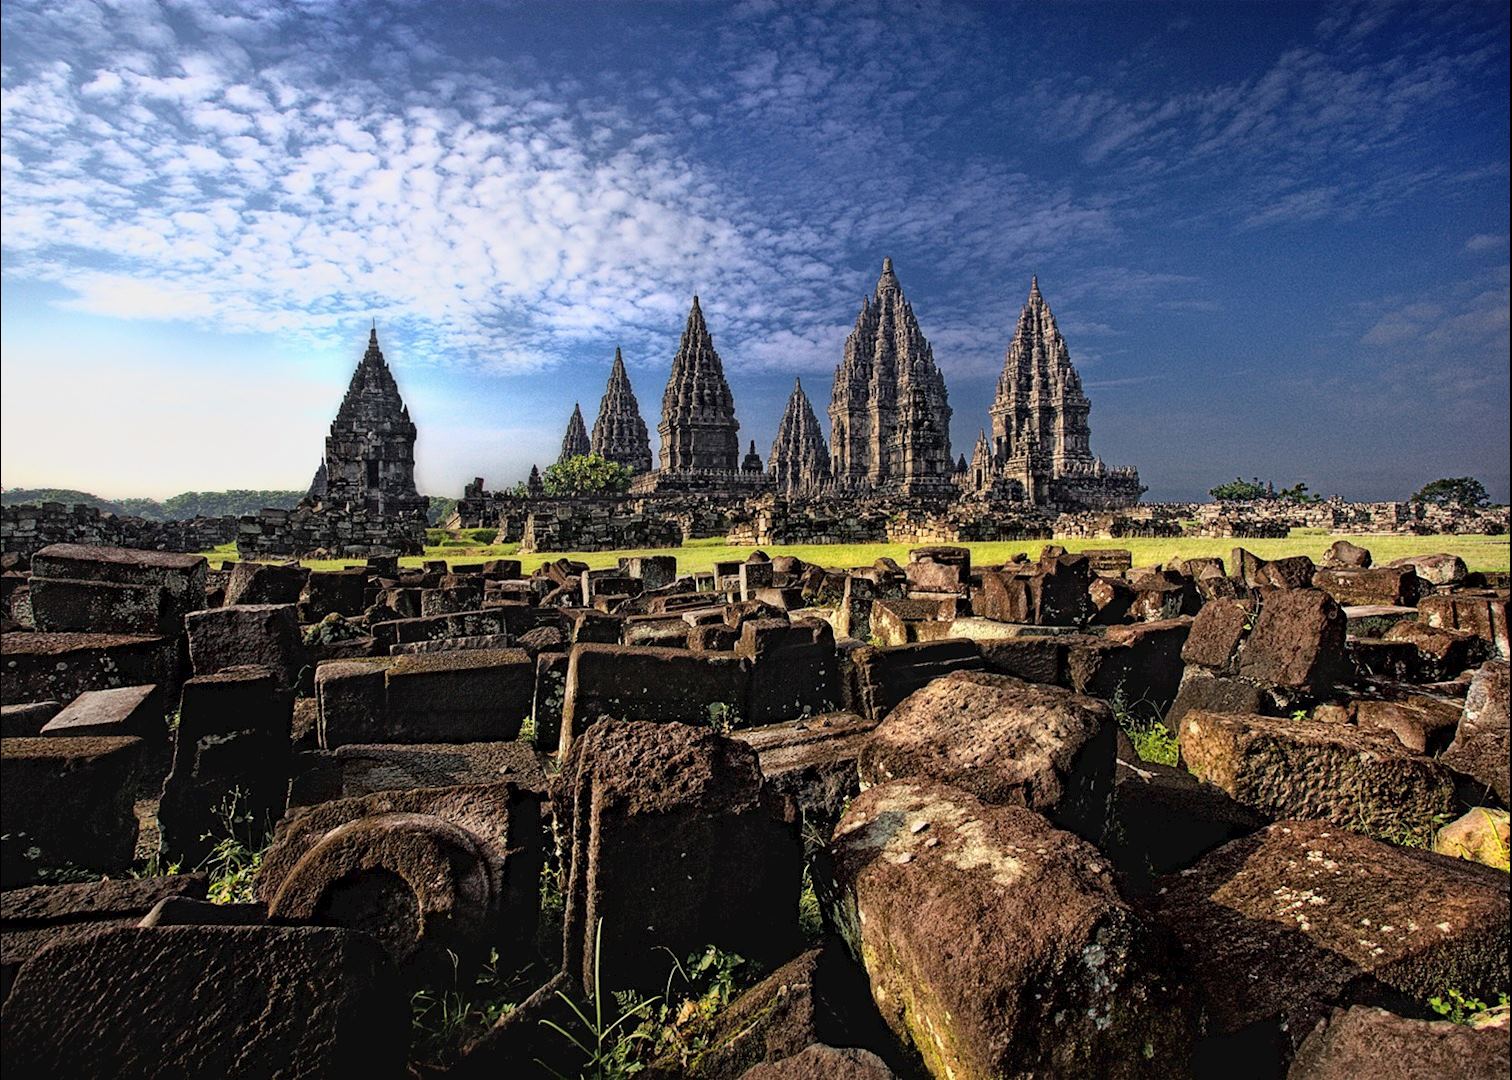 Visit Yogyakarta on a trip to Indonesia | Audley Travel